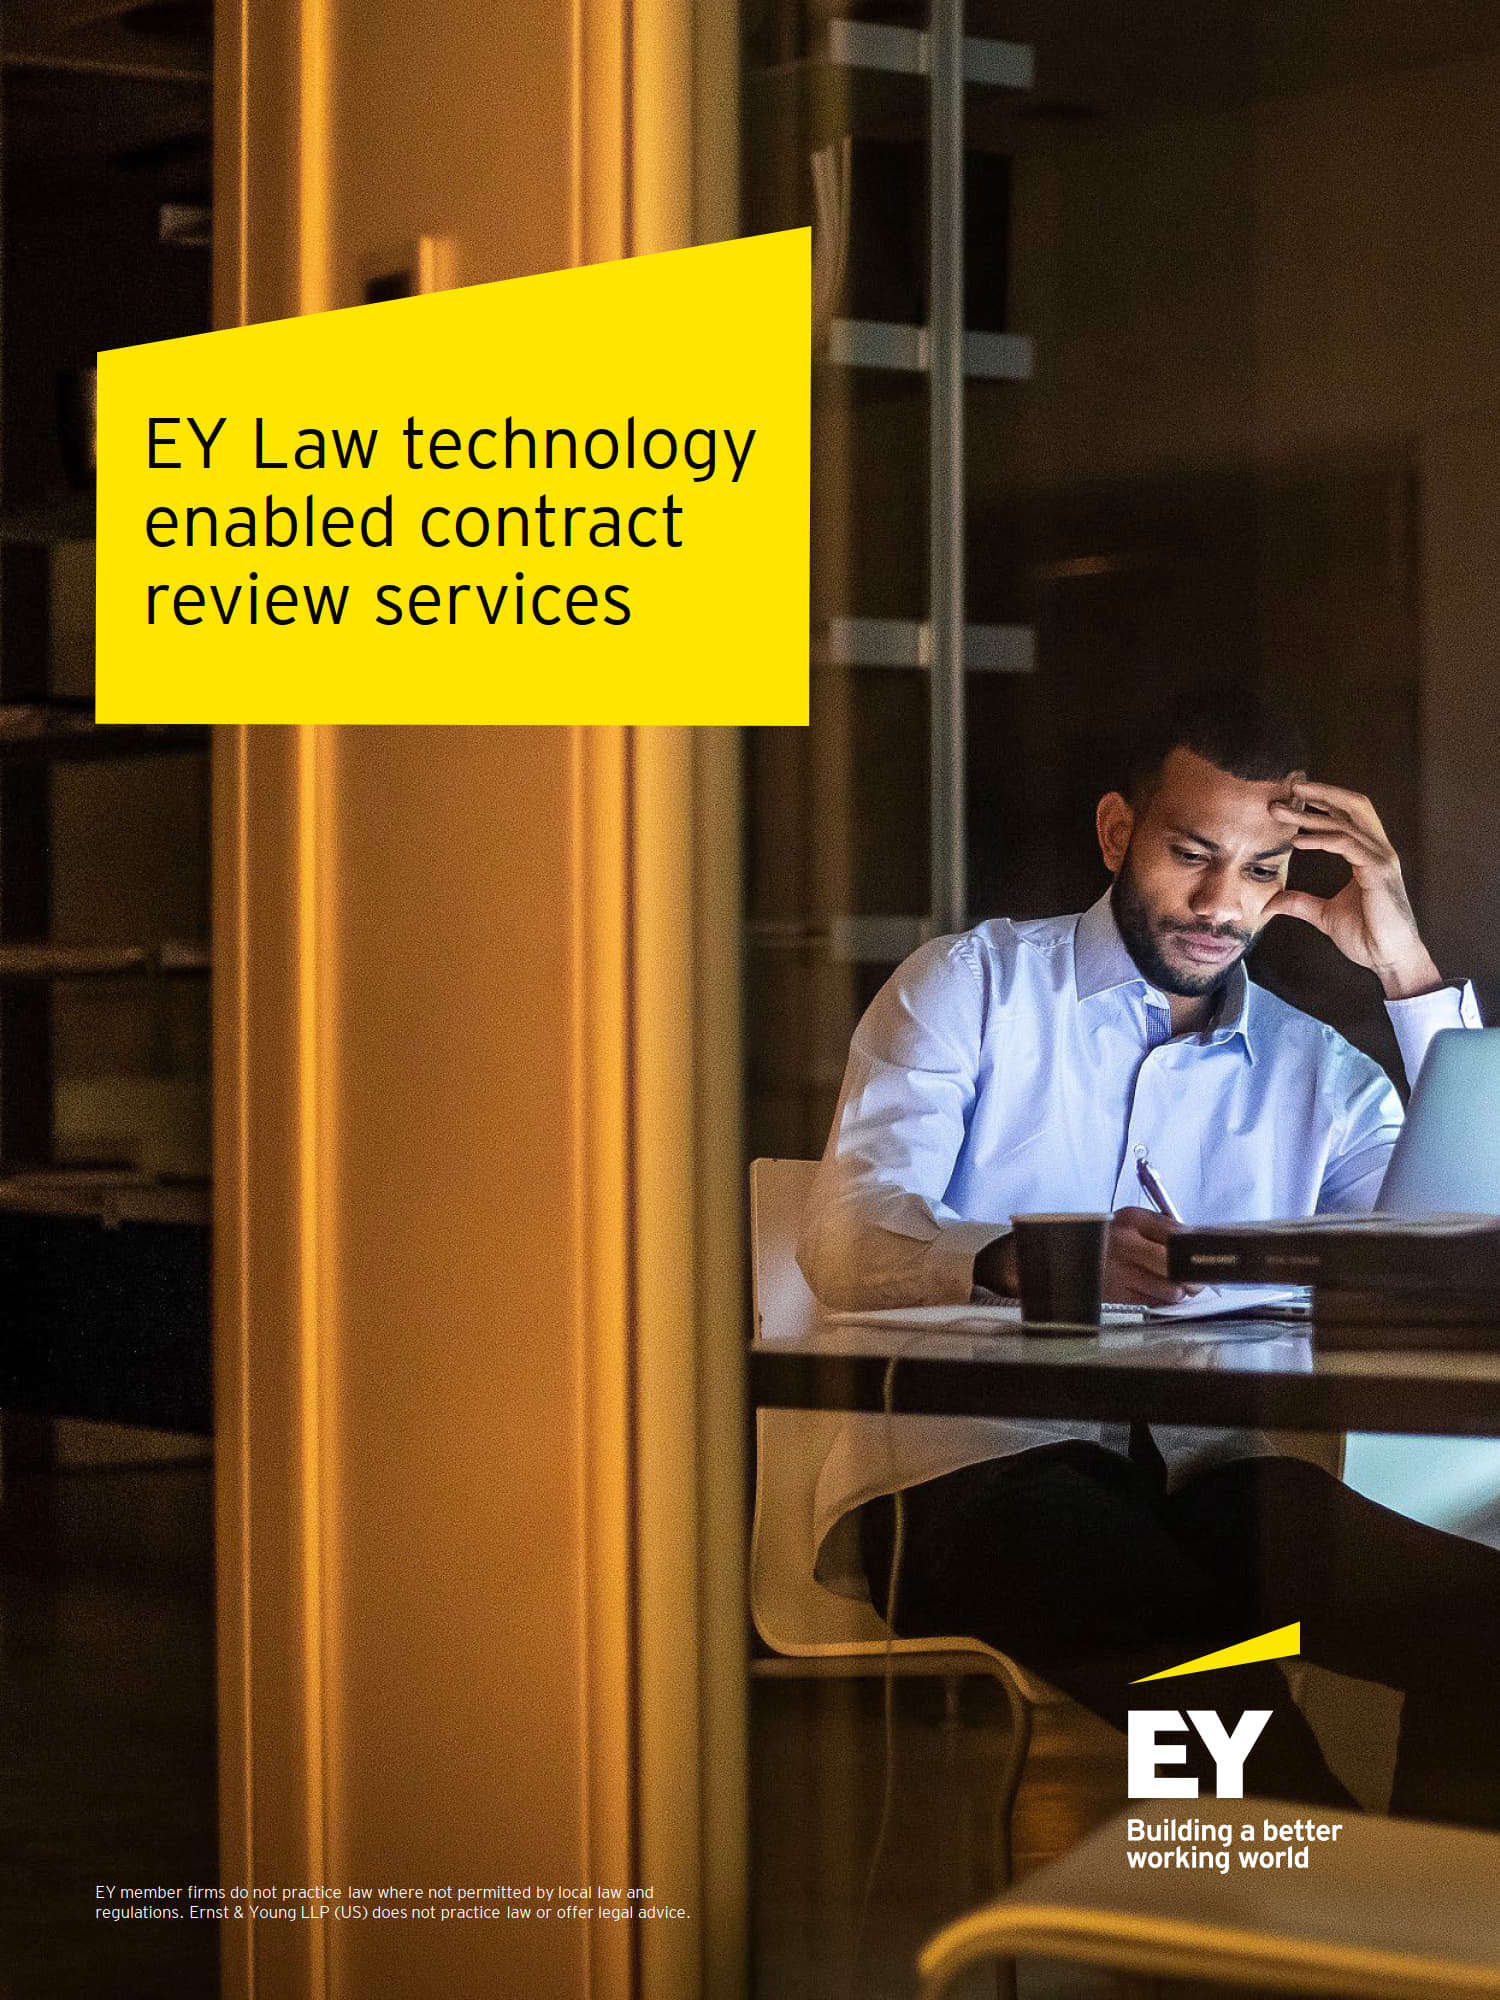 EY Law technology enabled contract review services, 2020